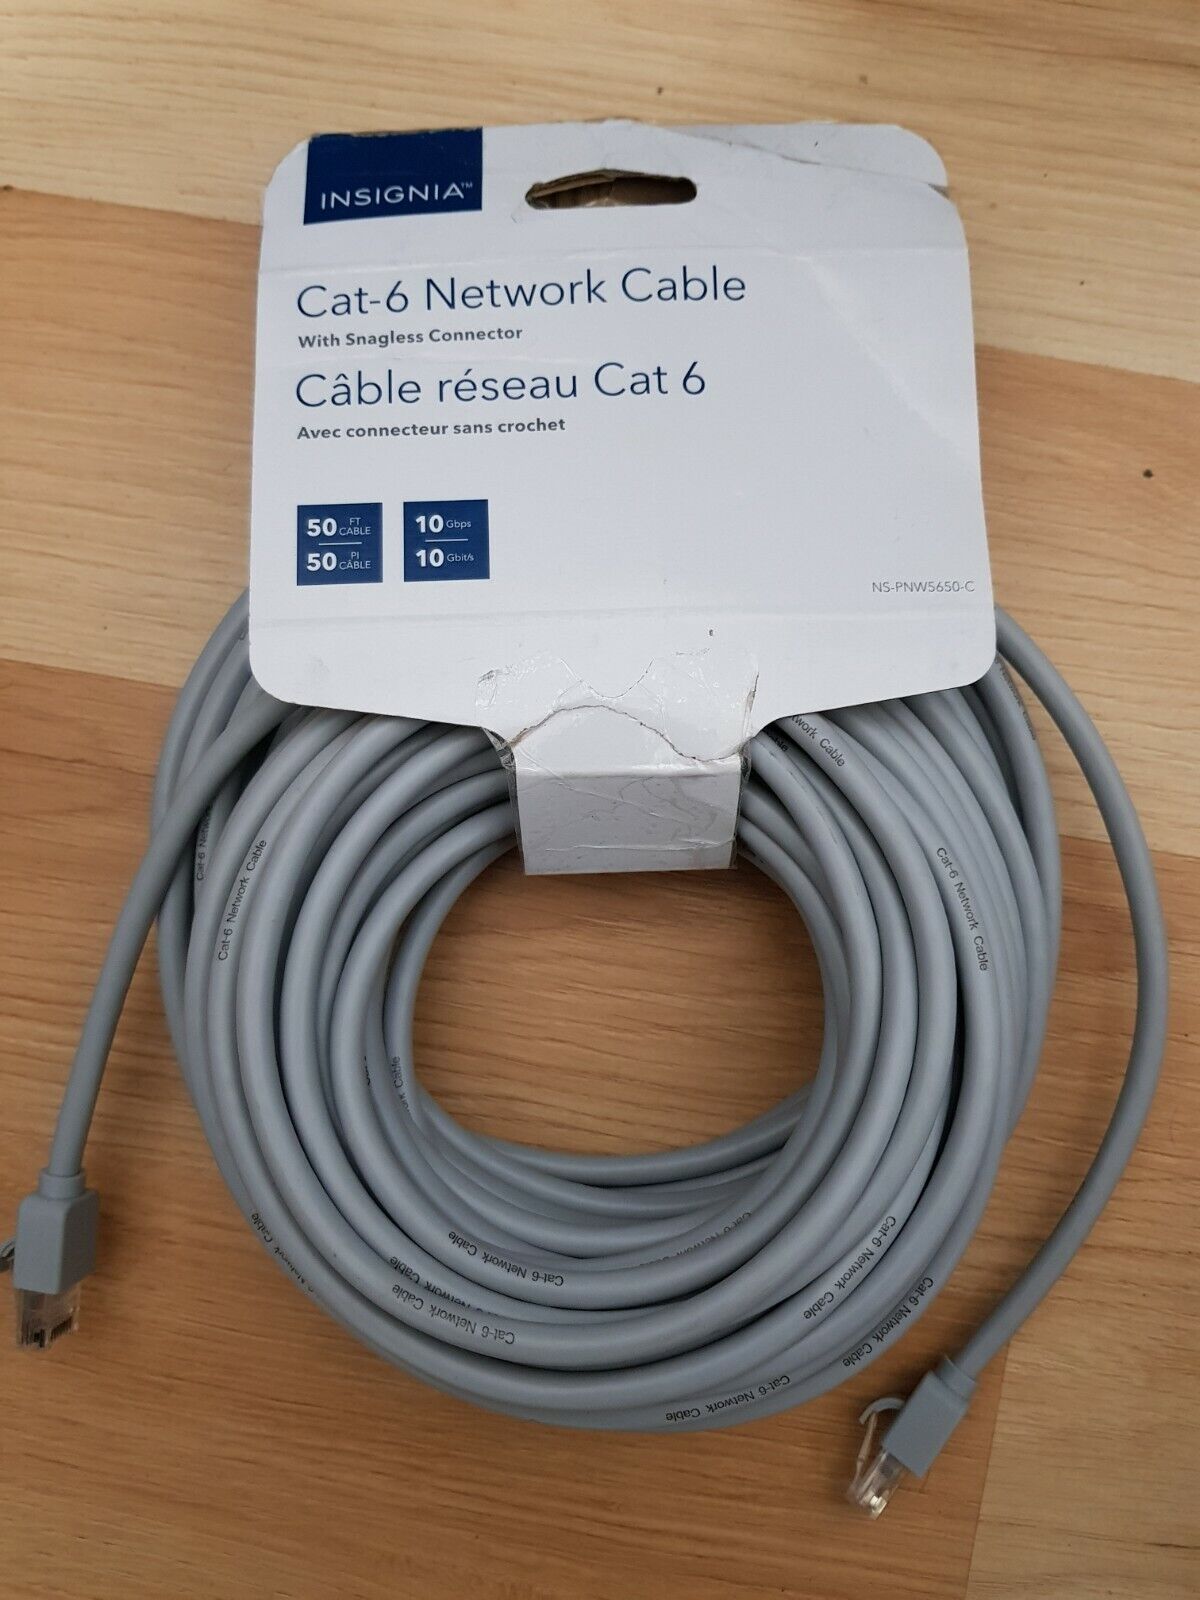 Insignia Cat6 Network Cable 50 feet MOdel : NS-PNW5650